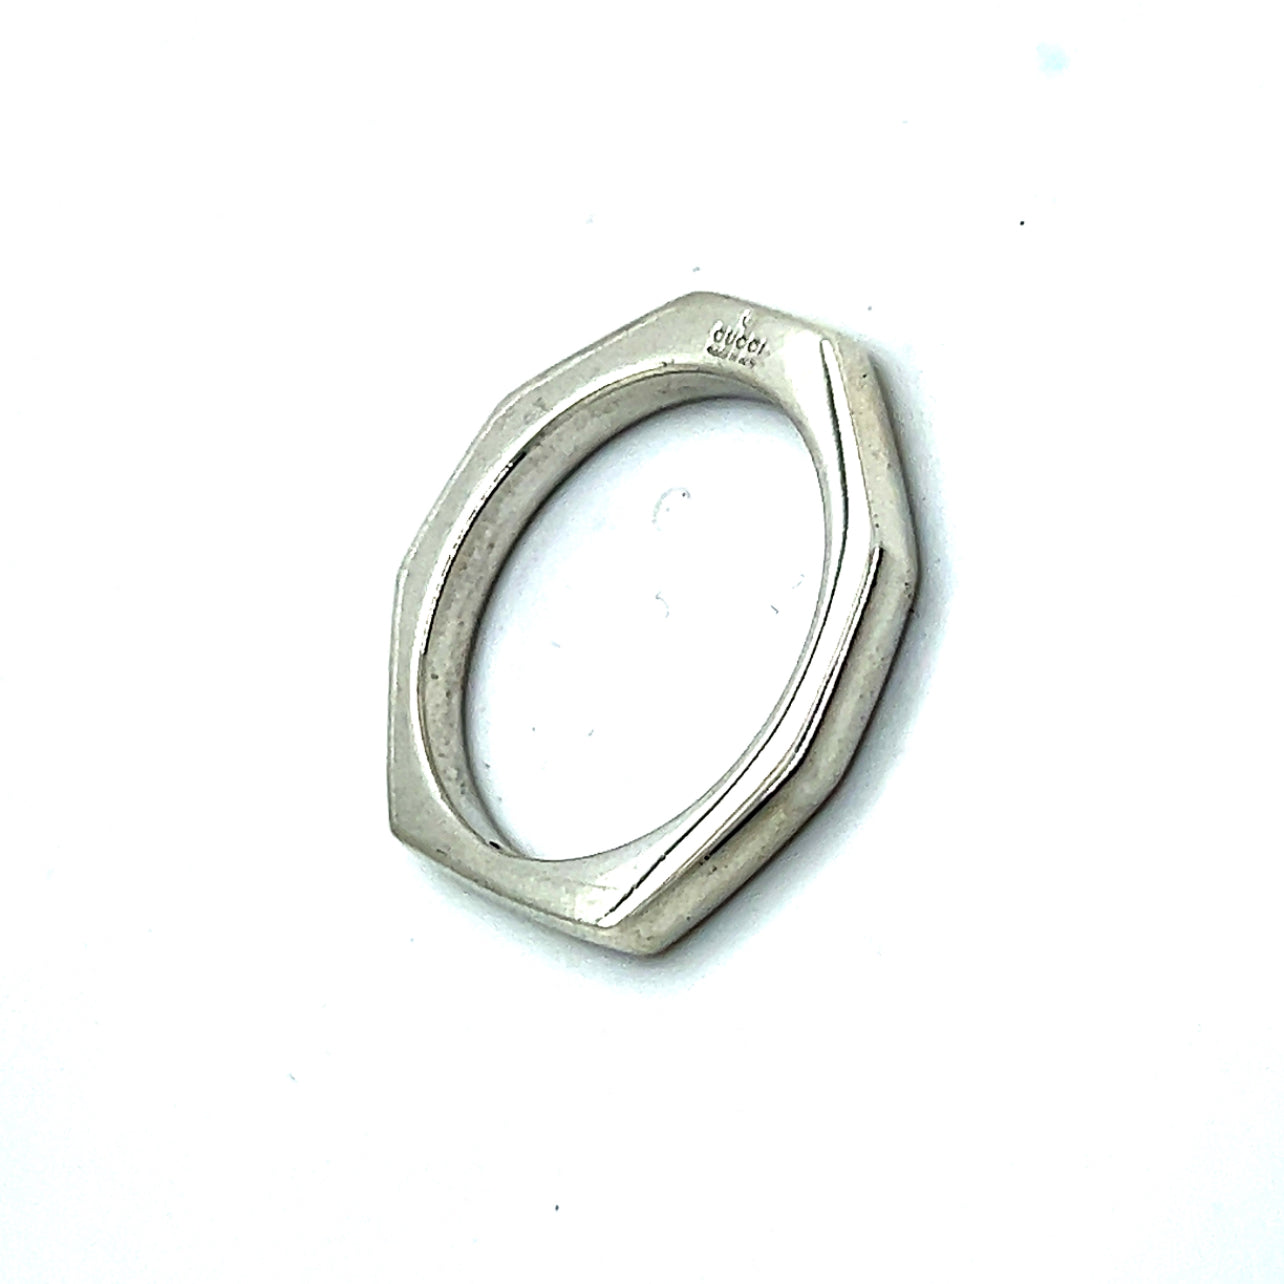 Gucci Authentic Estate Abstract Ring Size 10.5 Sterling Silver G5